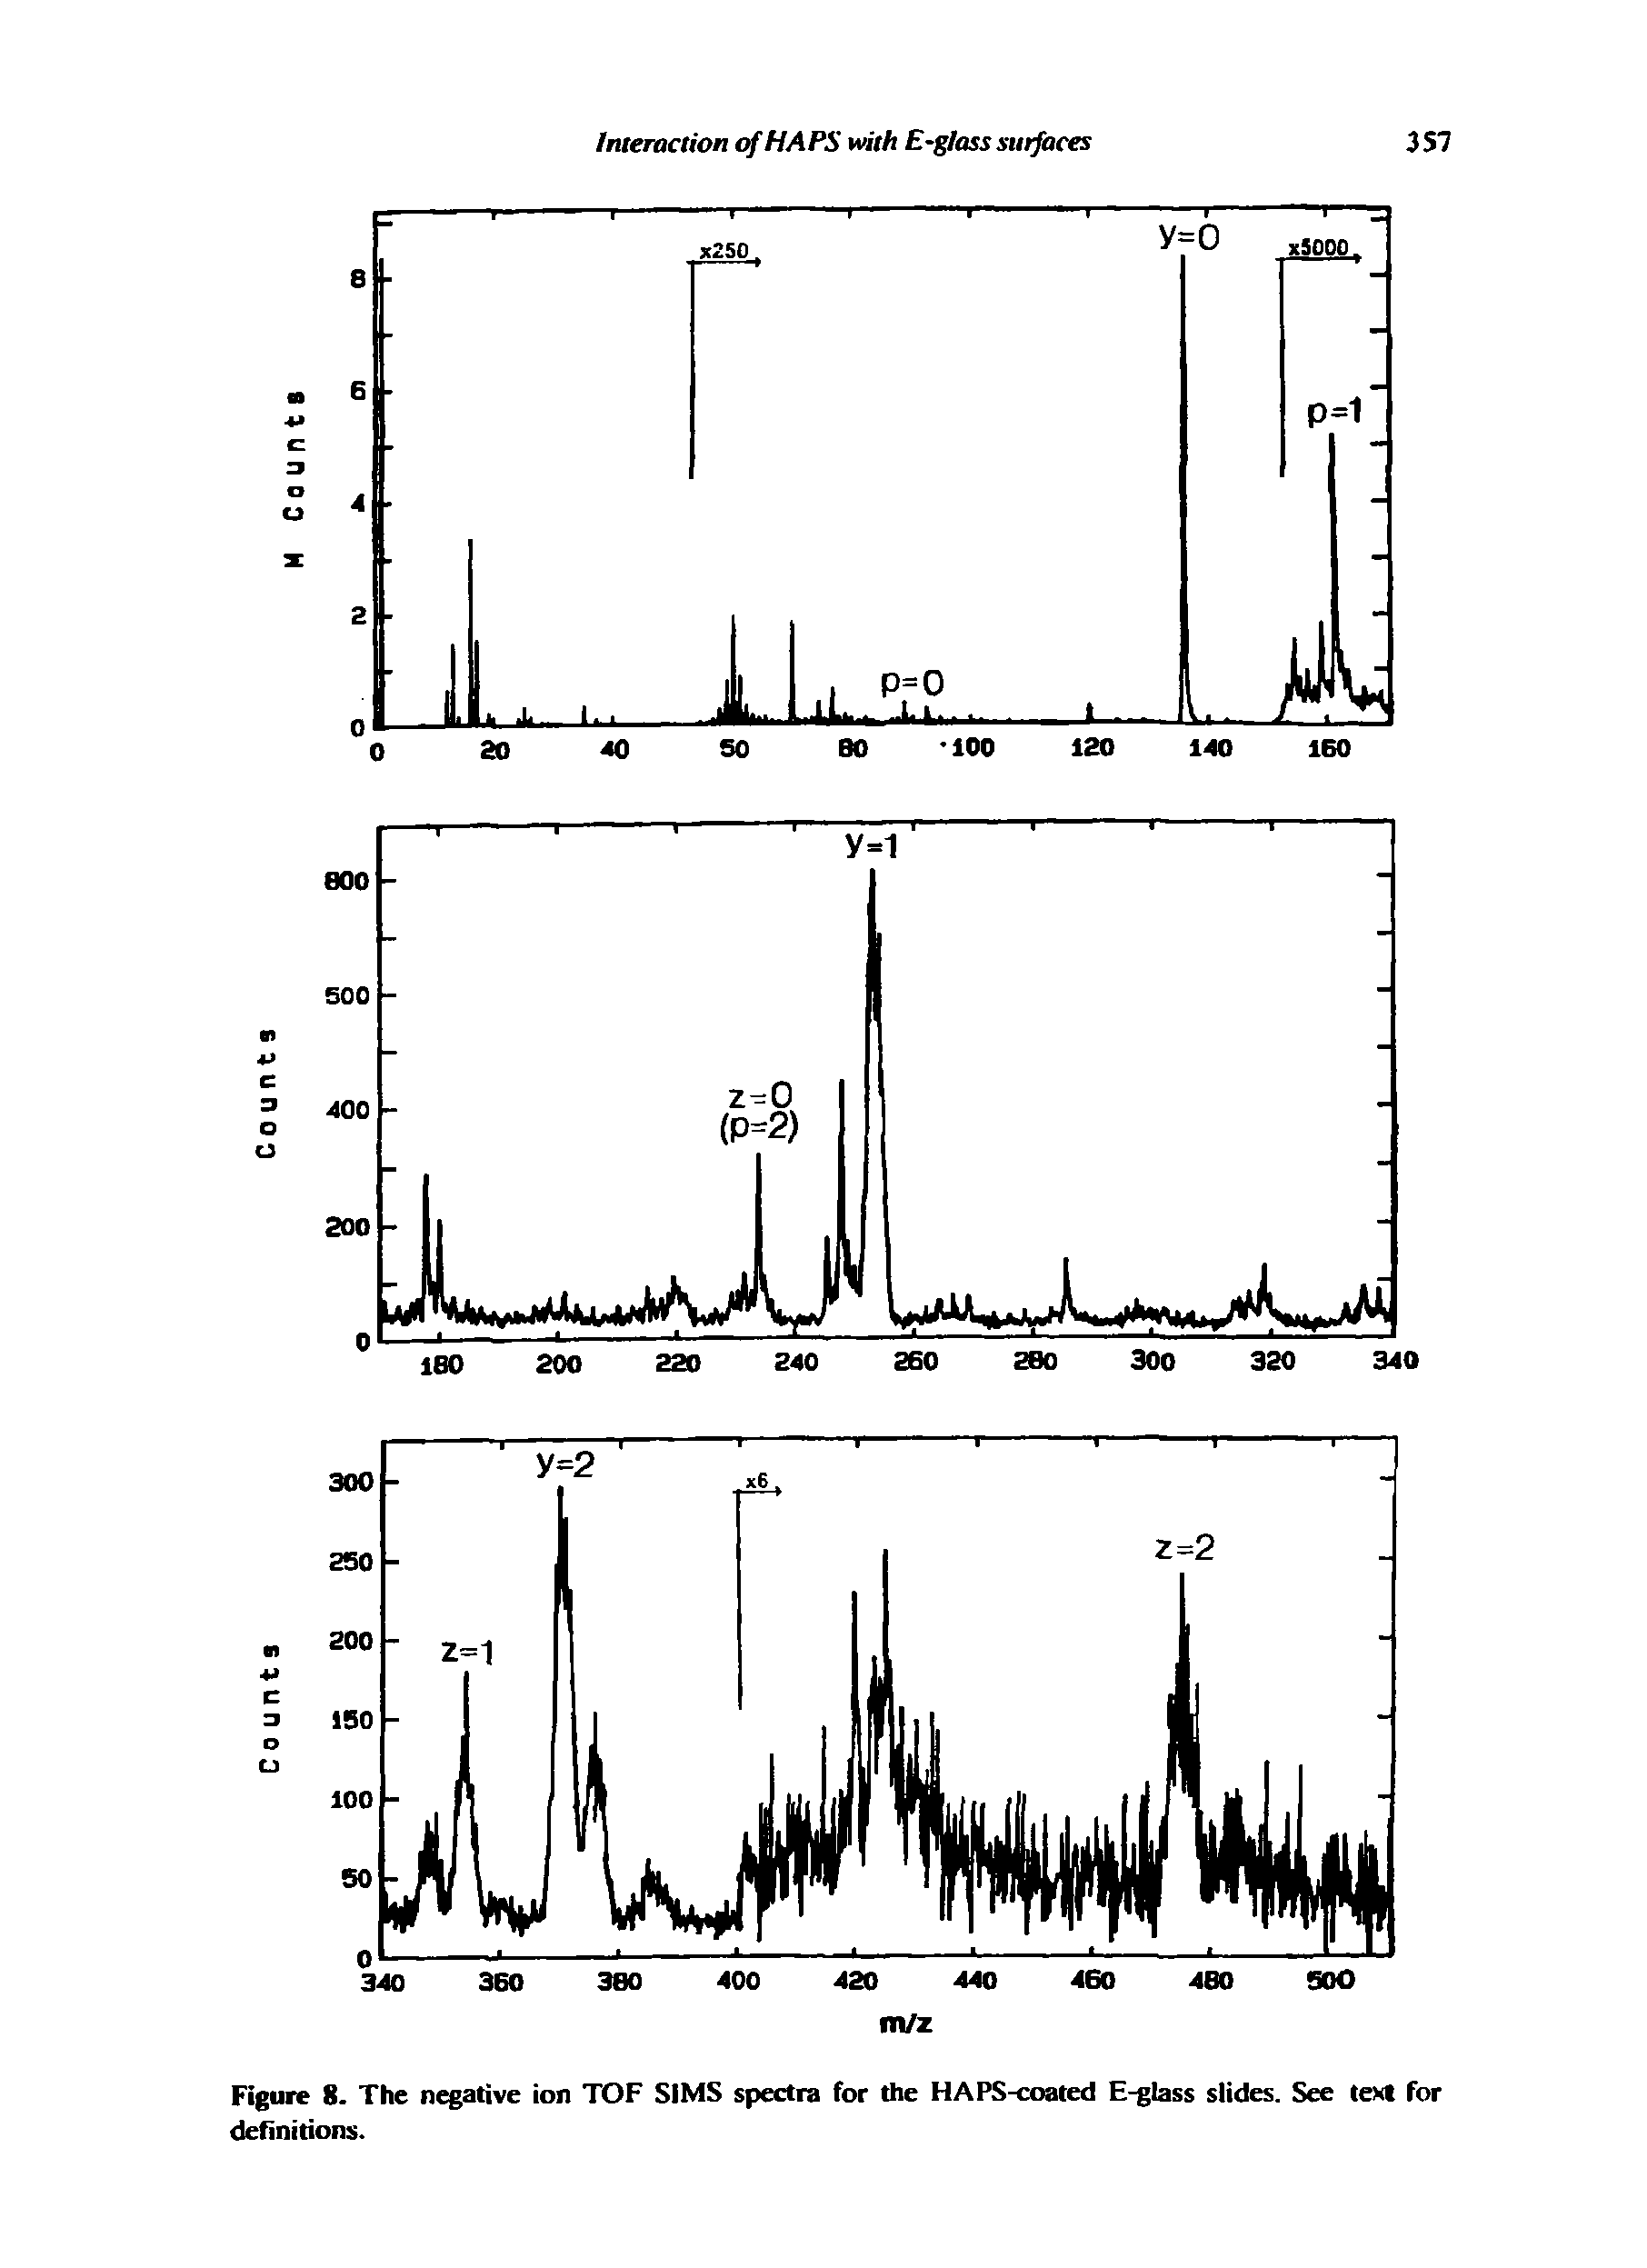 Figure 8. The negative ion TOF SIMS spectra for the HAPS-coated E-glass slides. See text for definitions.